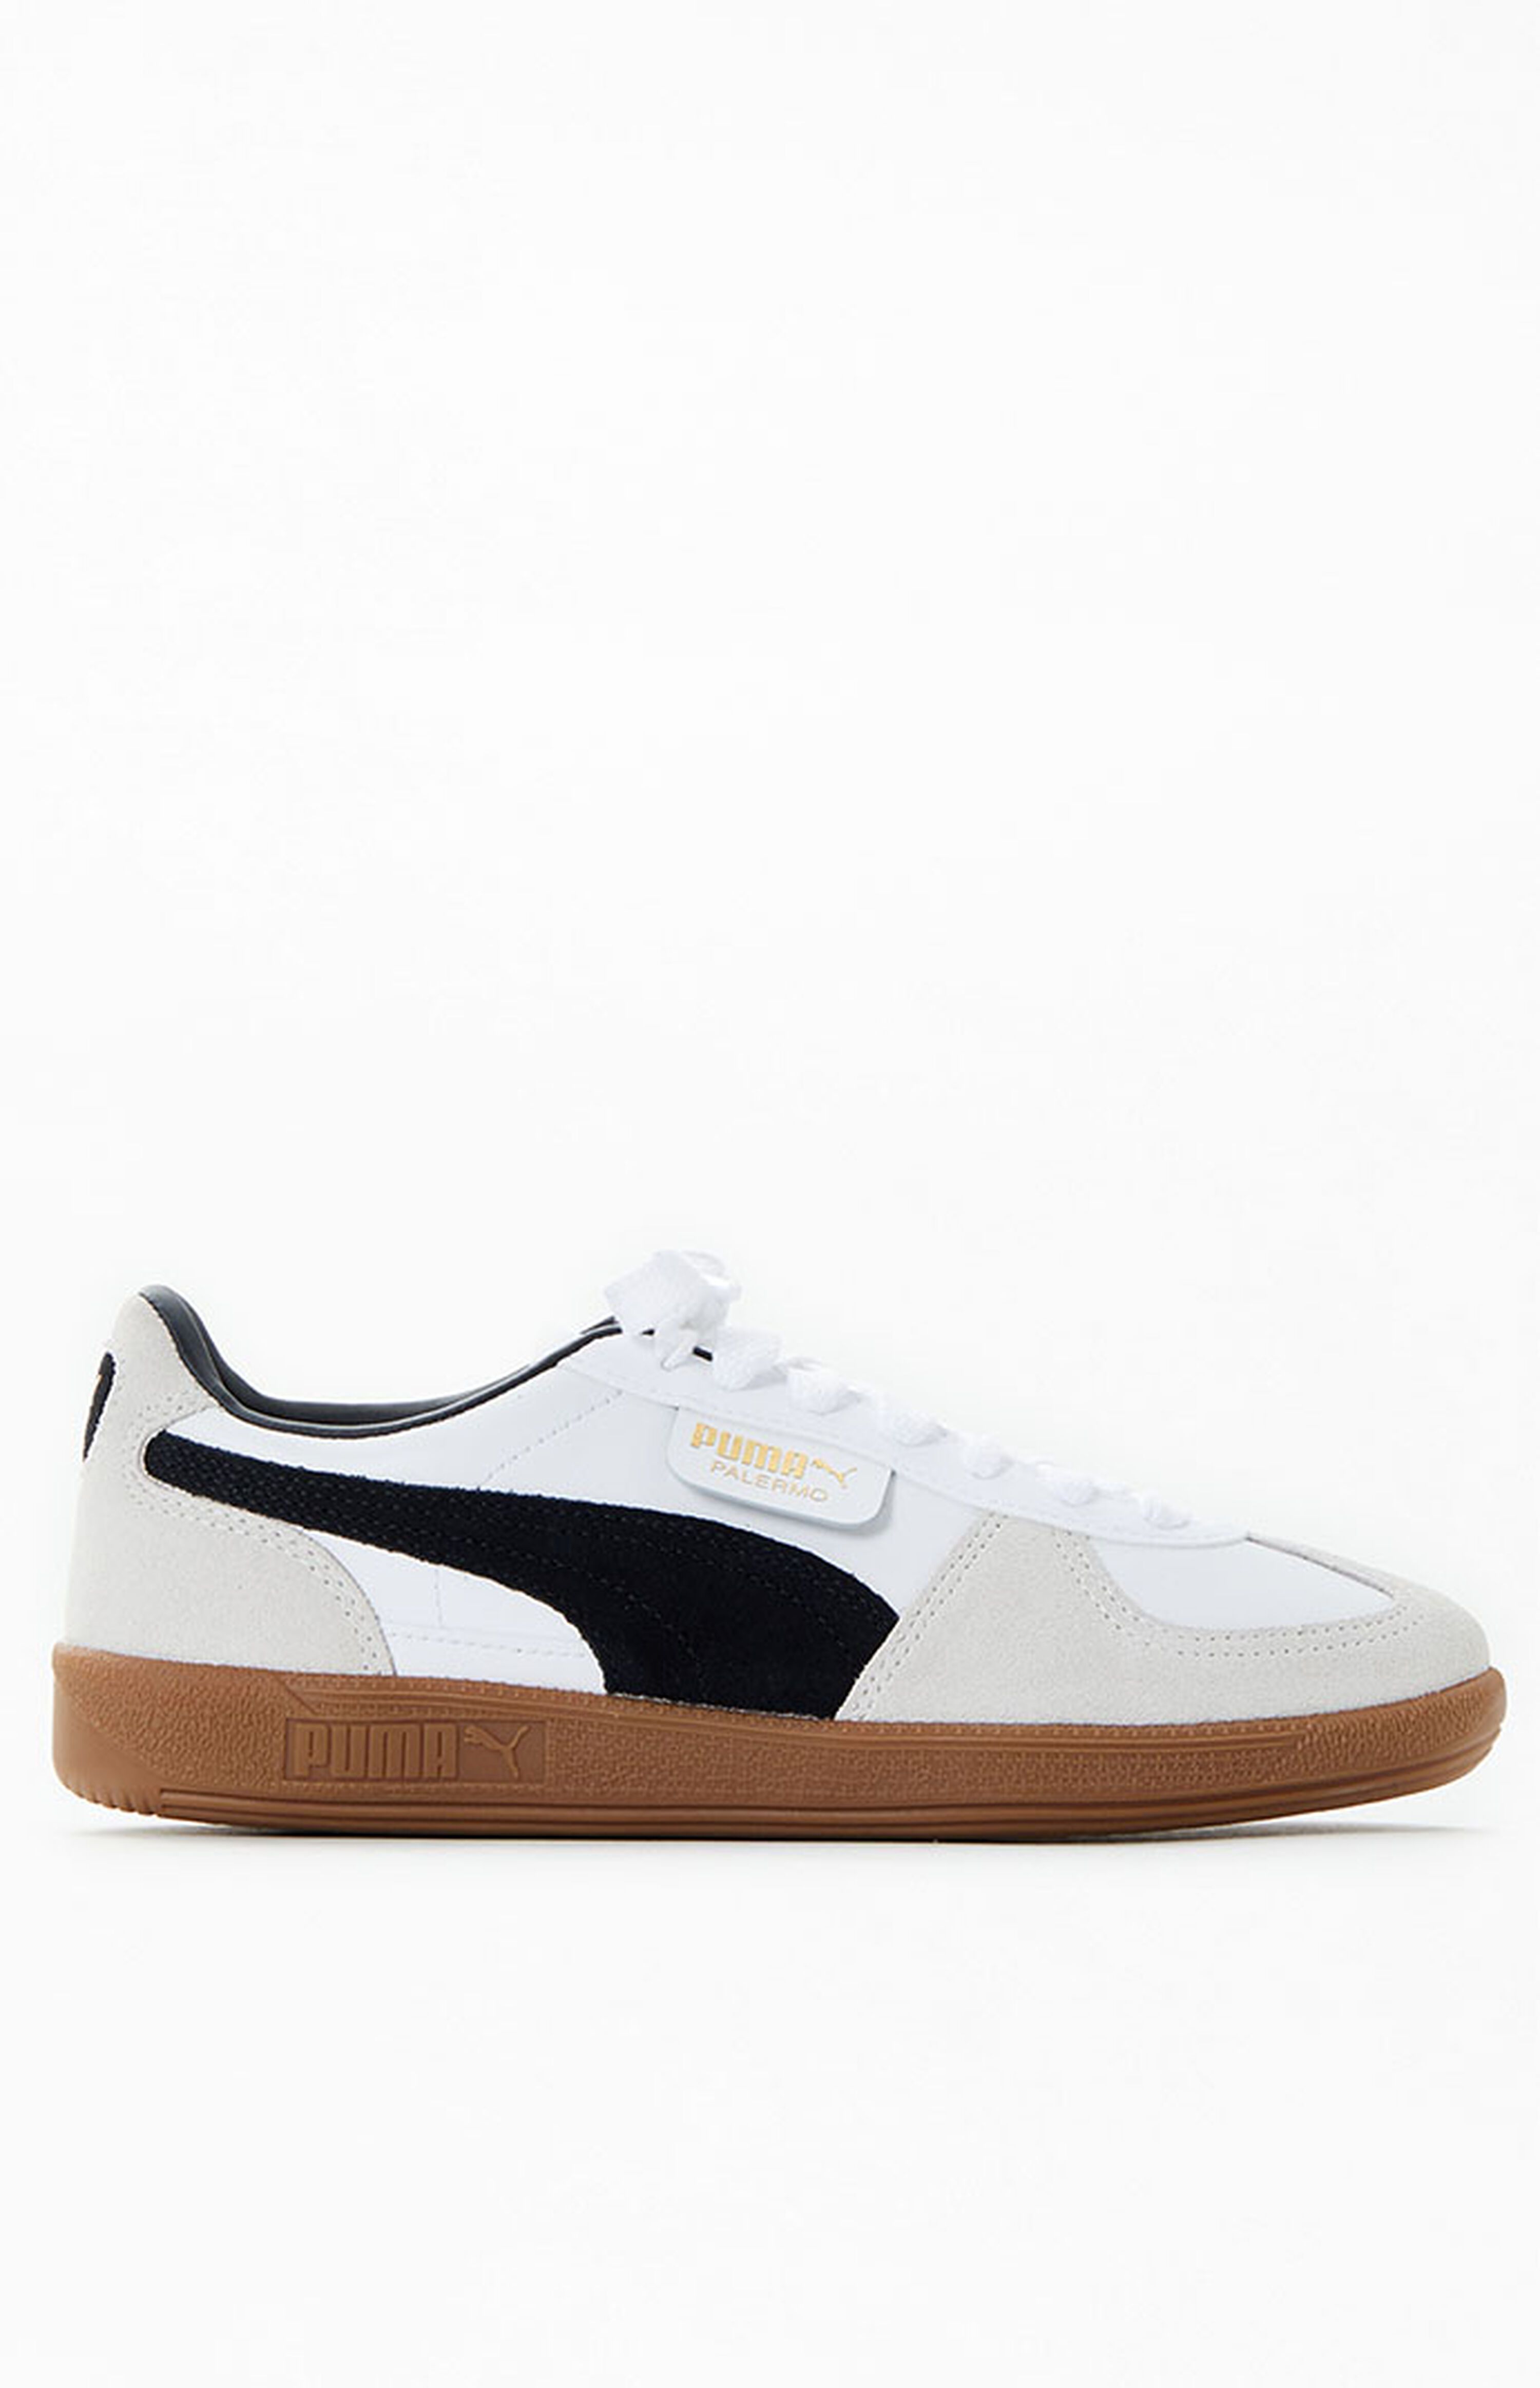 Puma Women's Palermo Leather Sneakers | PacSun